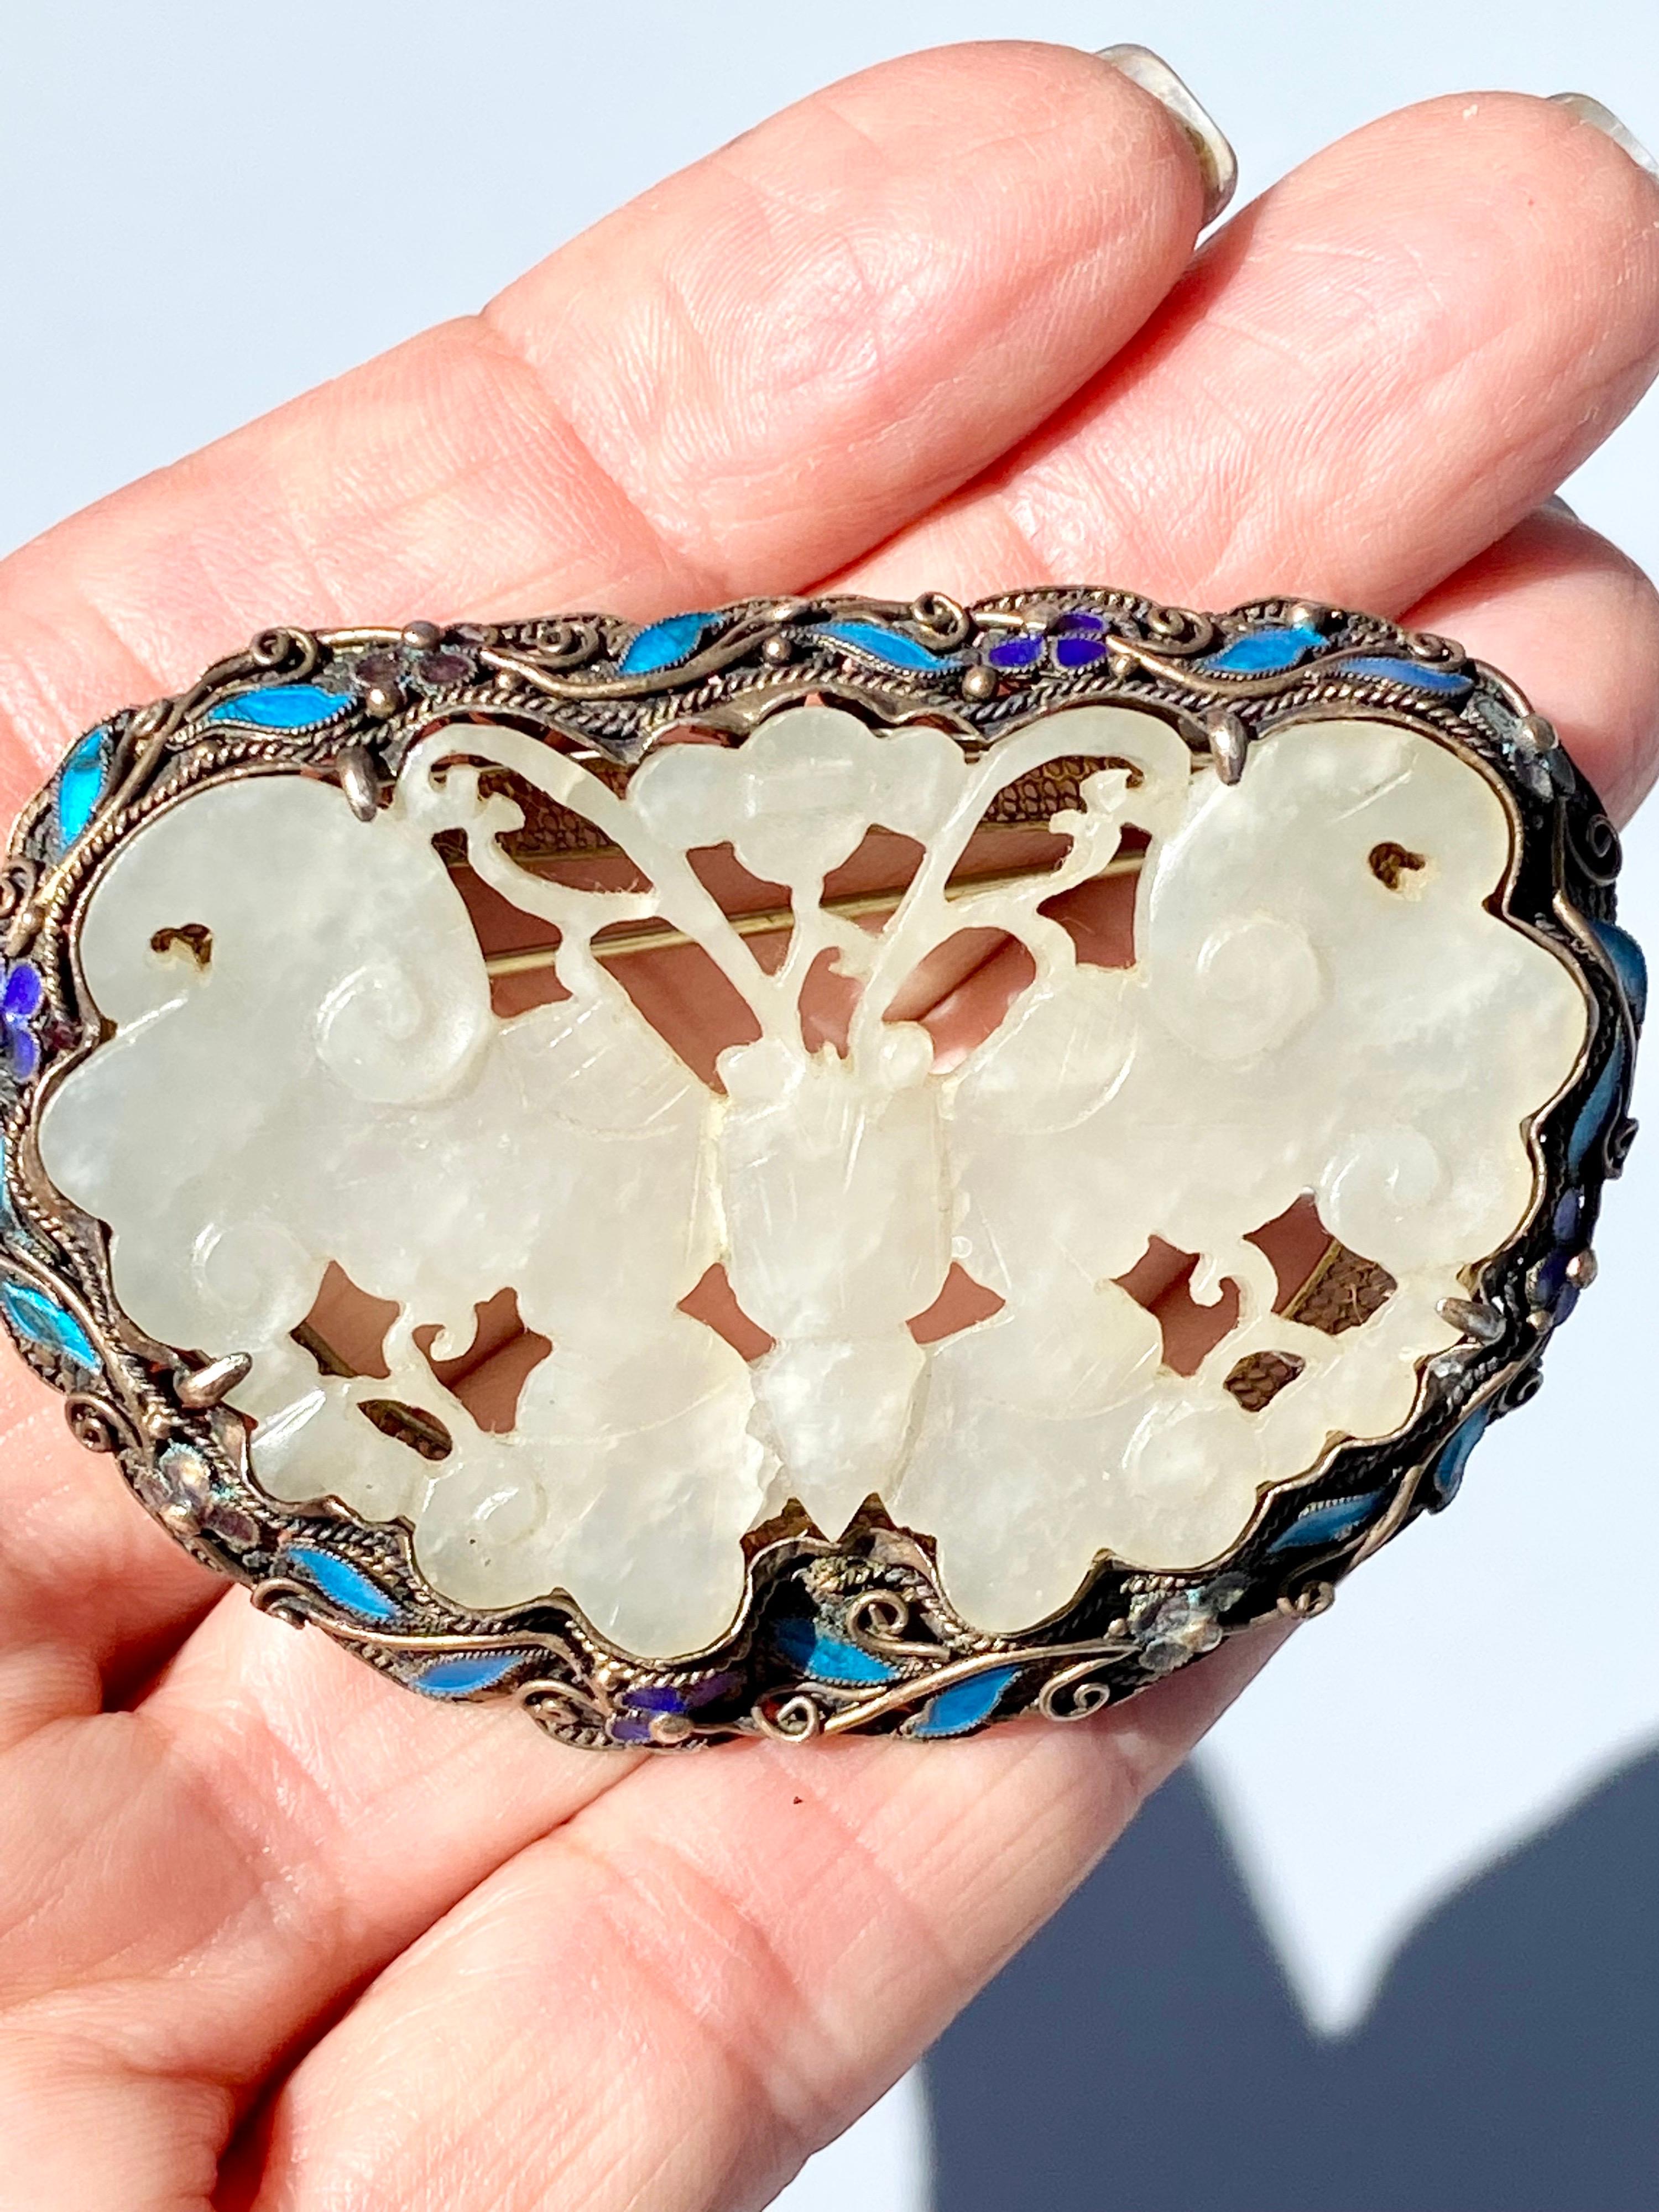 Jadeite Butterfly Enamel and Lapis Brooch Pin Circa 1970

Whimsical artistry of carvings detailed in jade set in a silver scrolled frame. Enameling is colored in turquoise and lapis lazuli surrounding the butterfly. The brooch measures 2.75 x 2